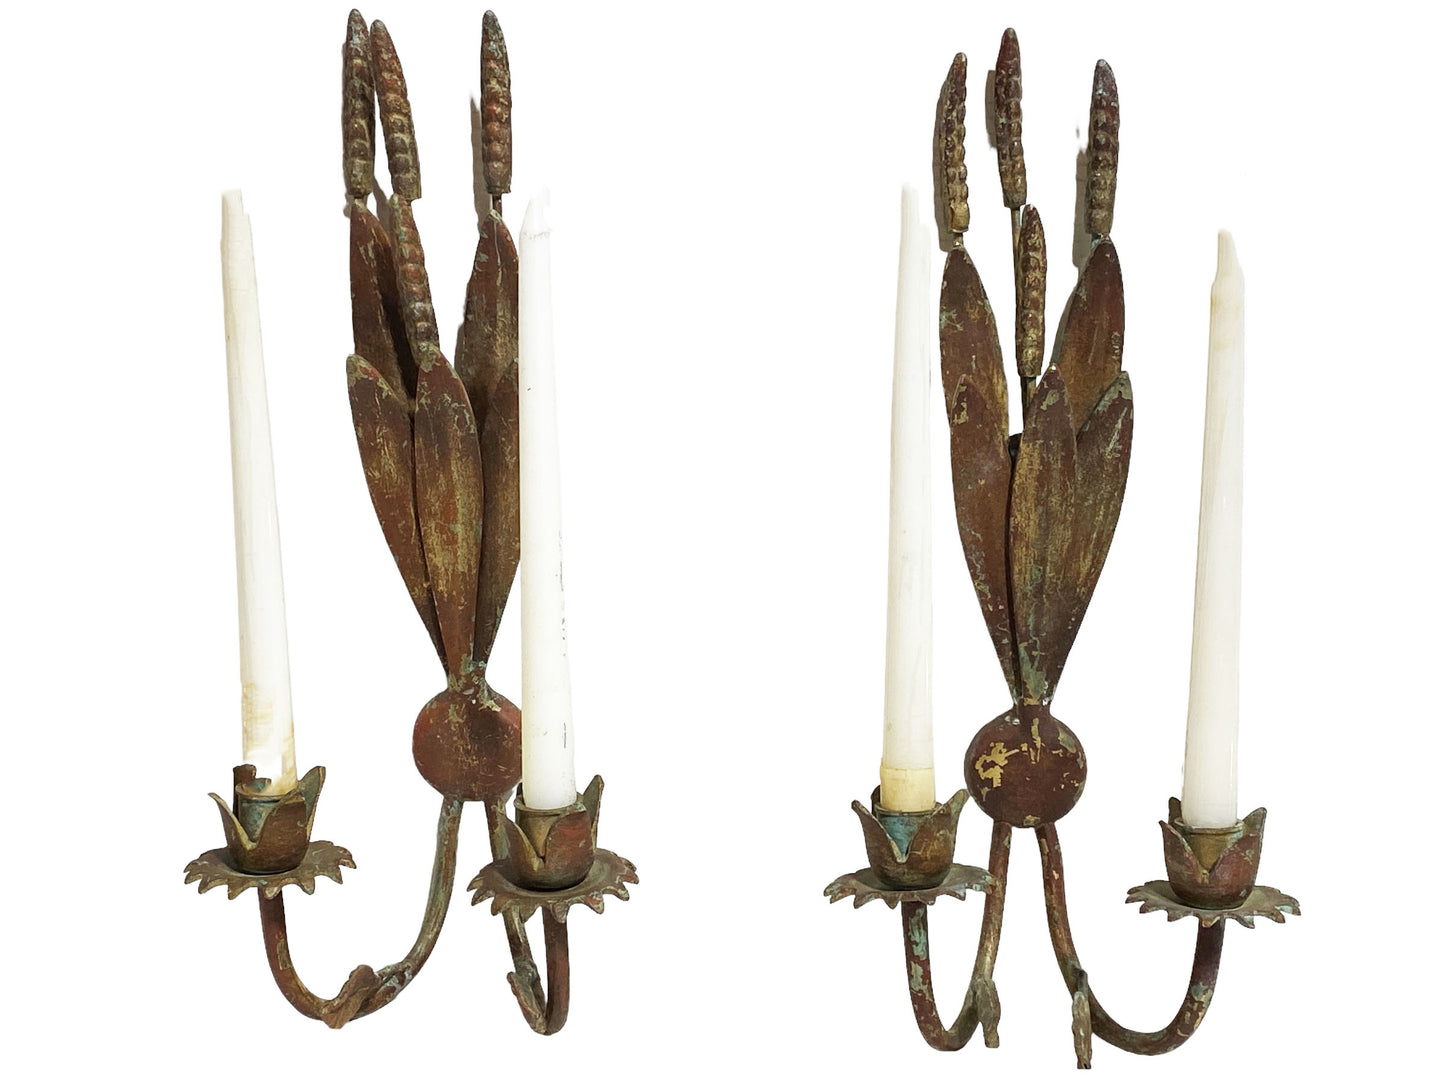 #7000 Shaby Chic French Rustic Wrought Iron  Wall Candle Holders 16" H Pair